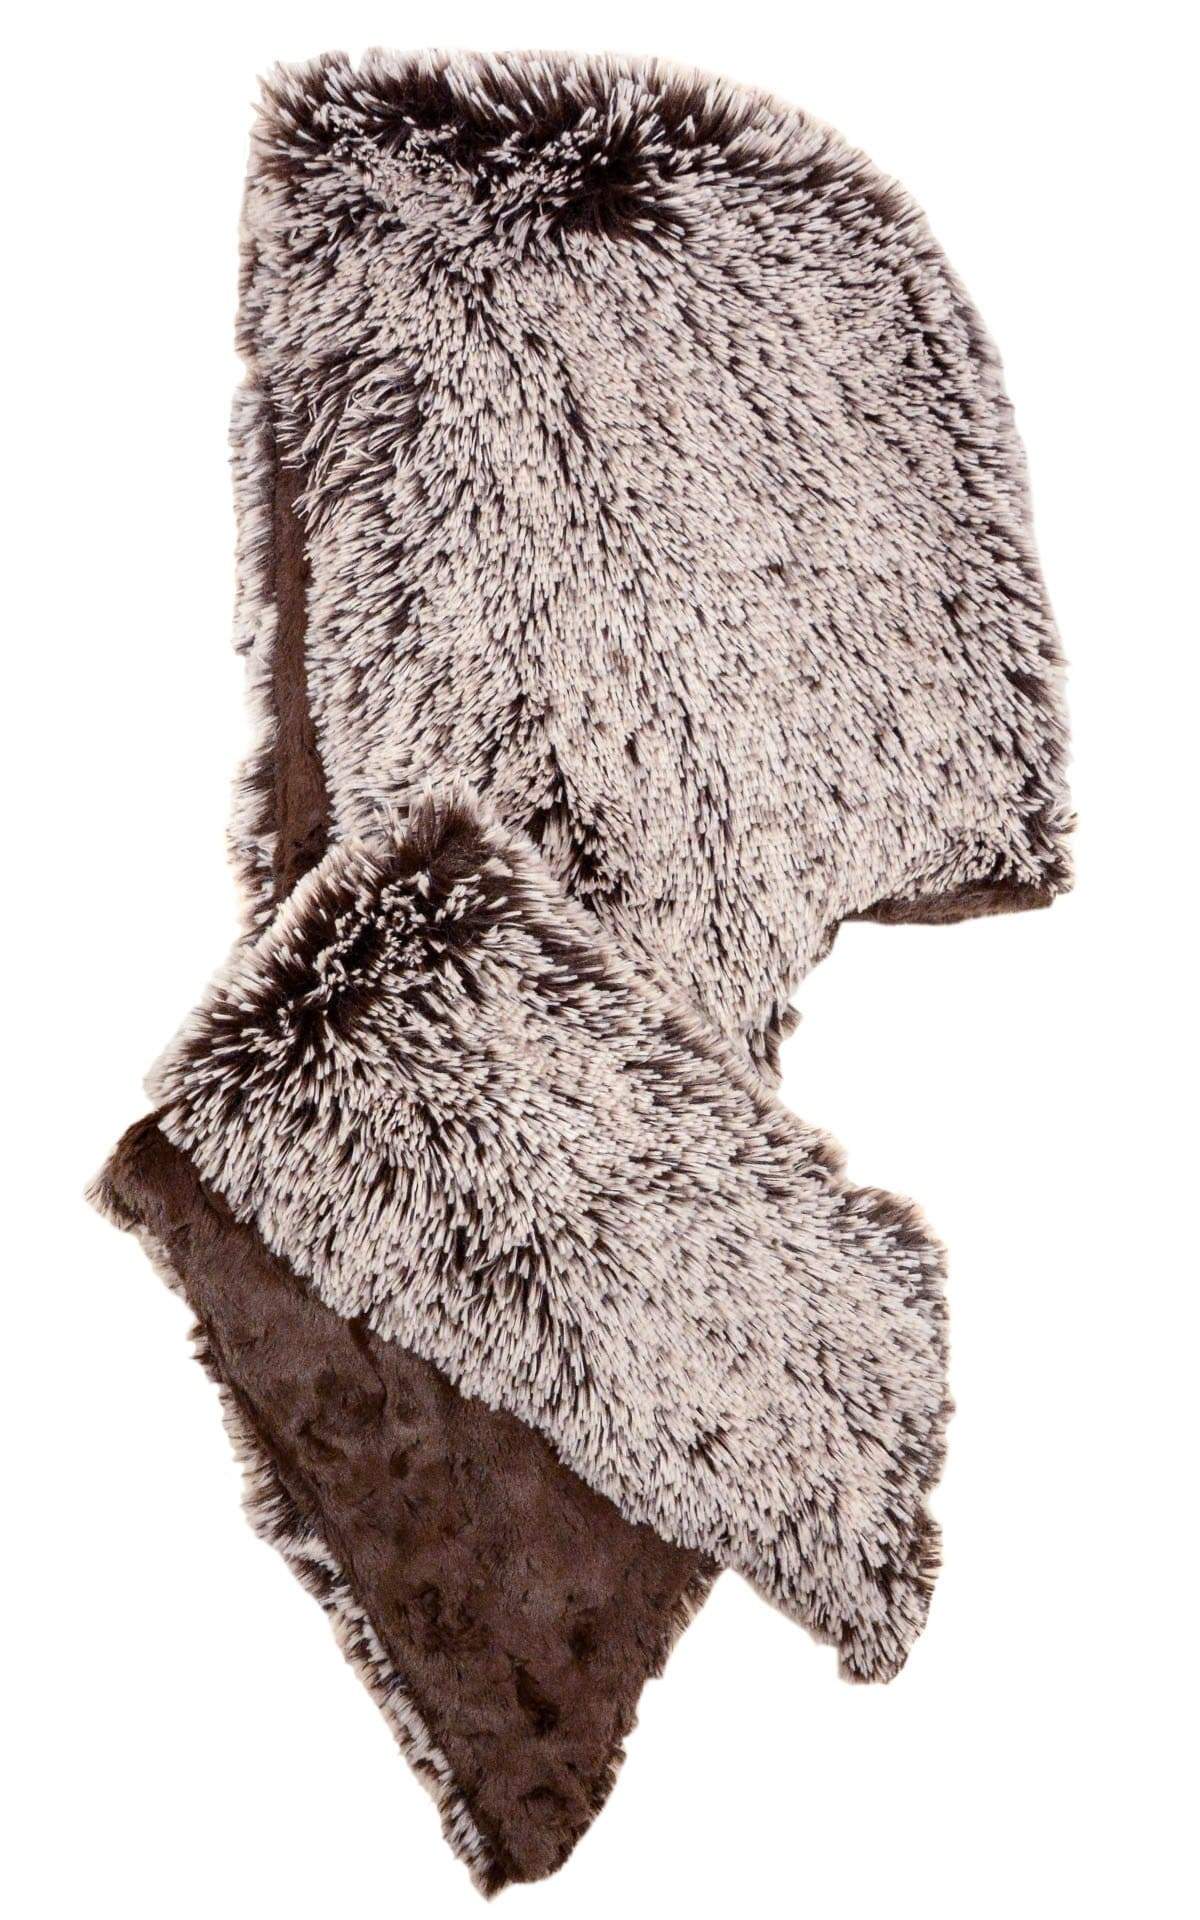 Pandemonium Millinery Hoody Scarf - Fox Faux Fur with Cuddly Fur Silver Tipped Fox Brown / Chocolate Scarves